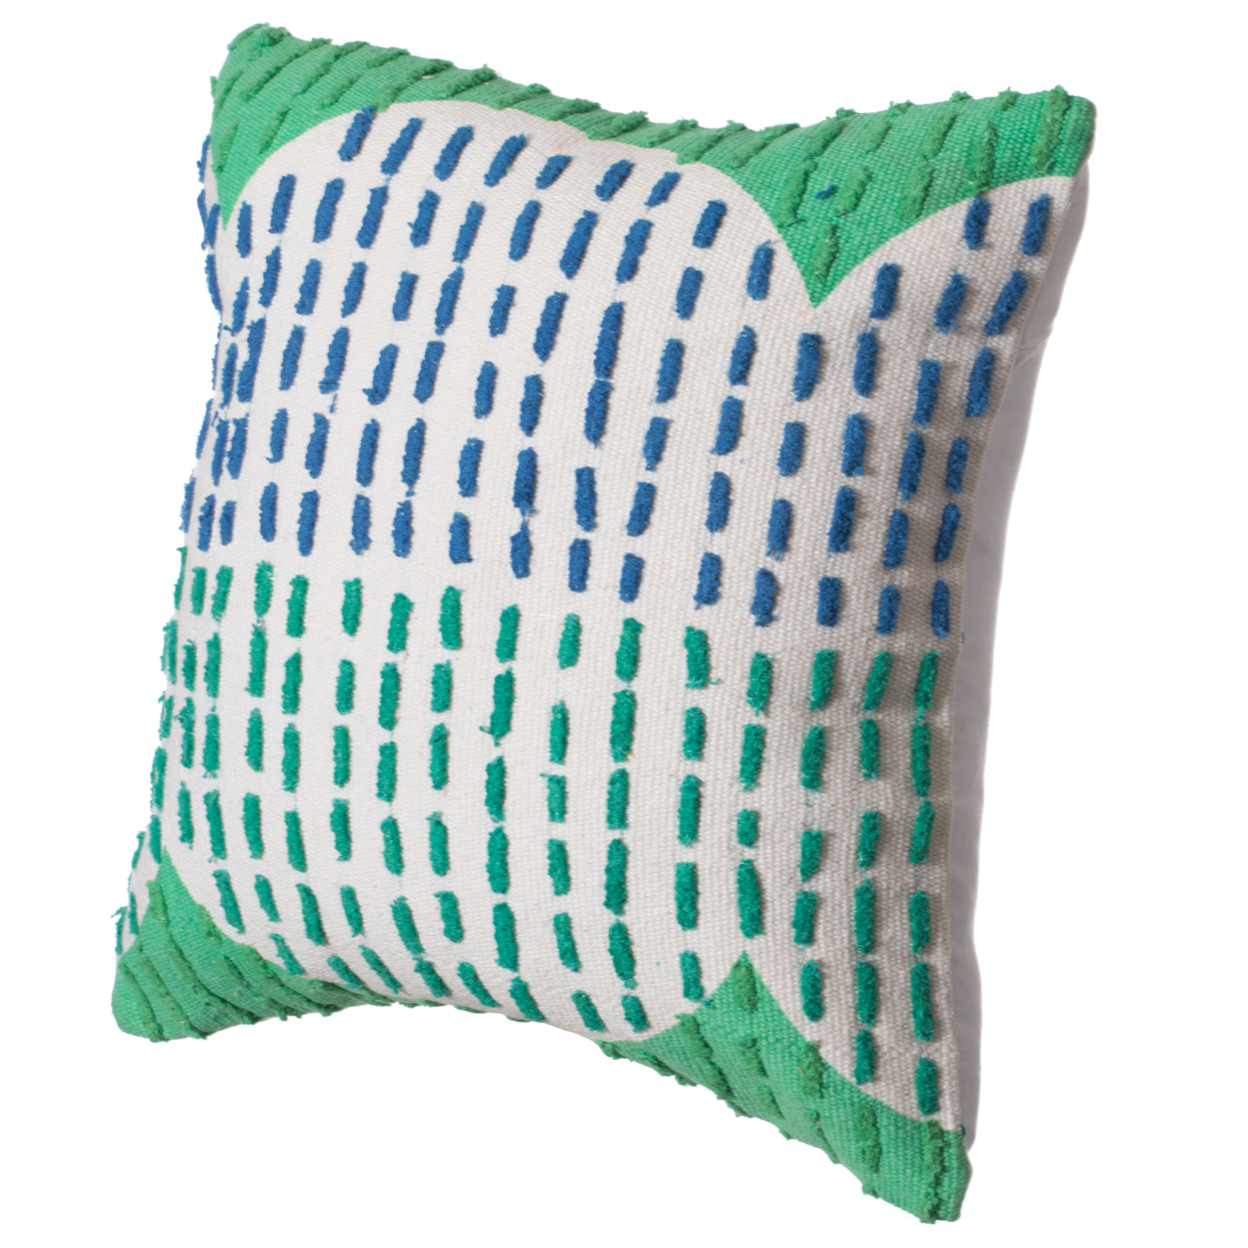 16" Handwoven Cotton Throw Pillow Cover with Ribbed Line Dots and Wave Border - green